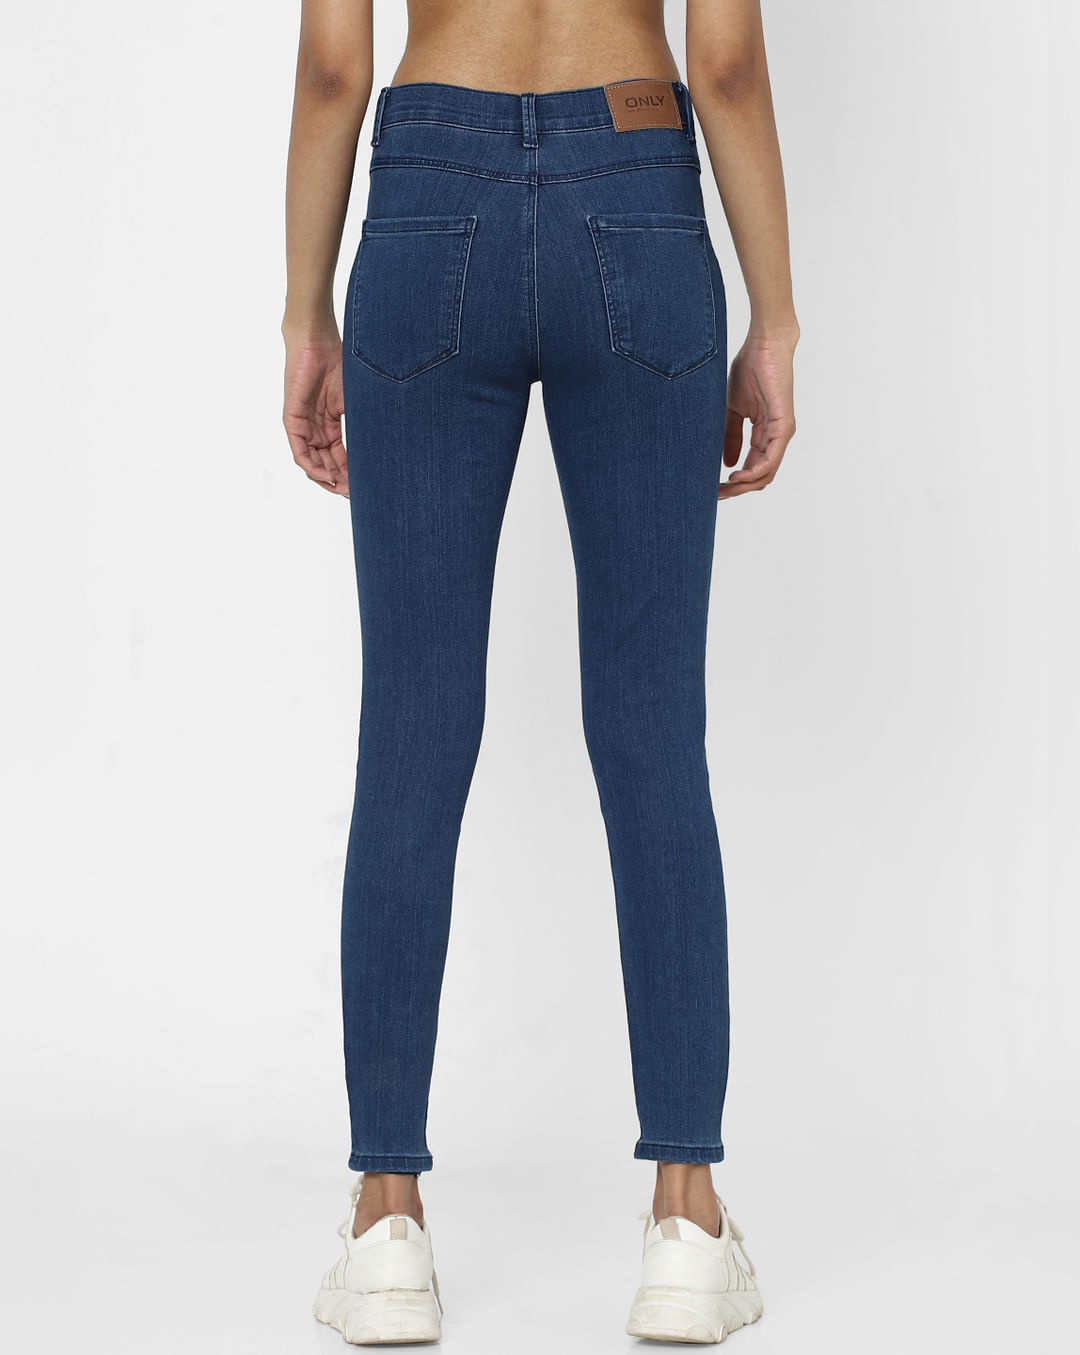 BLUE High waisted tie detail jeggings, Womens Jeggings